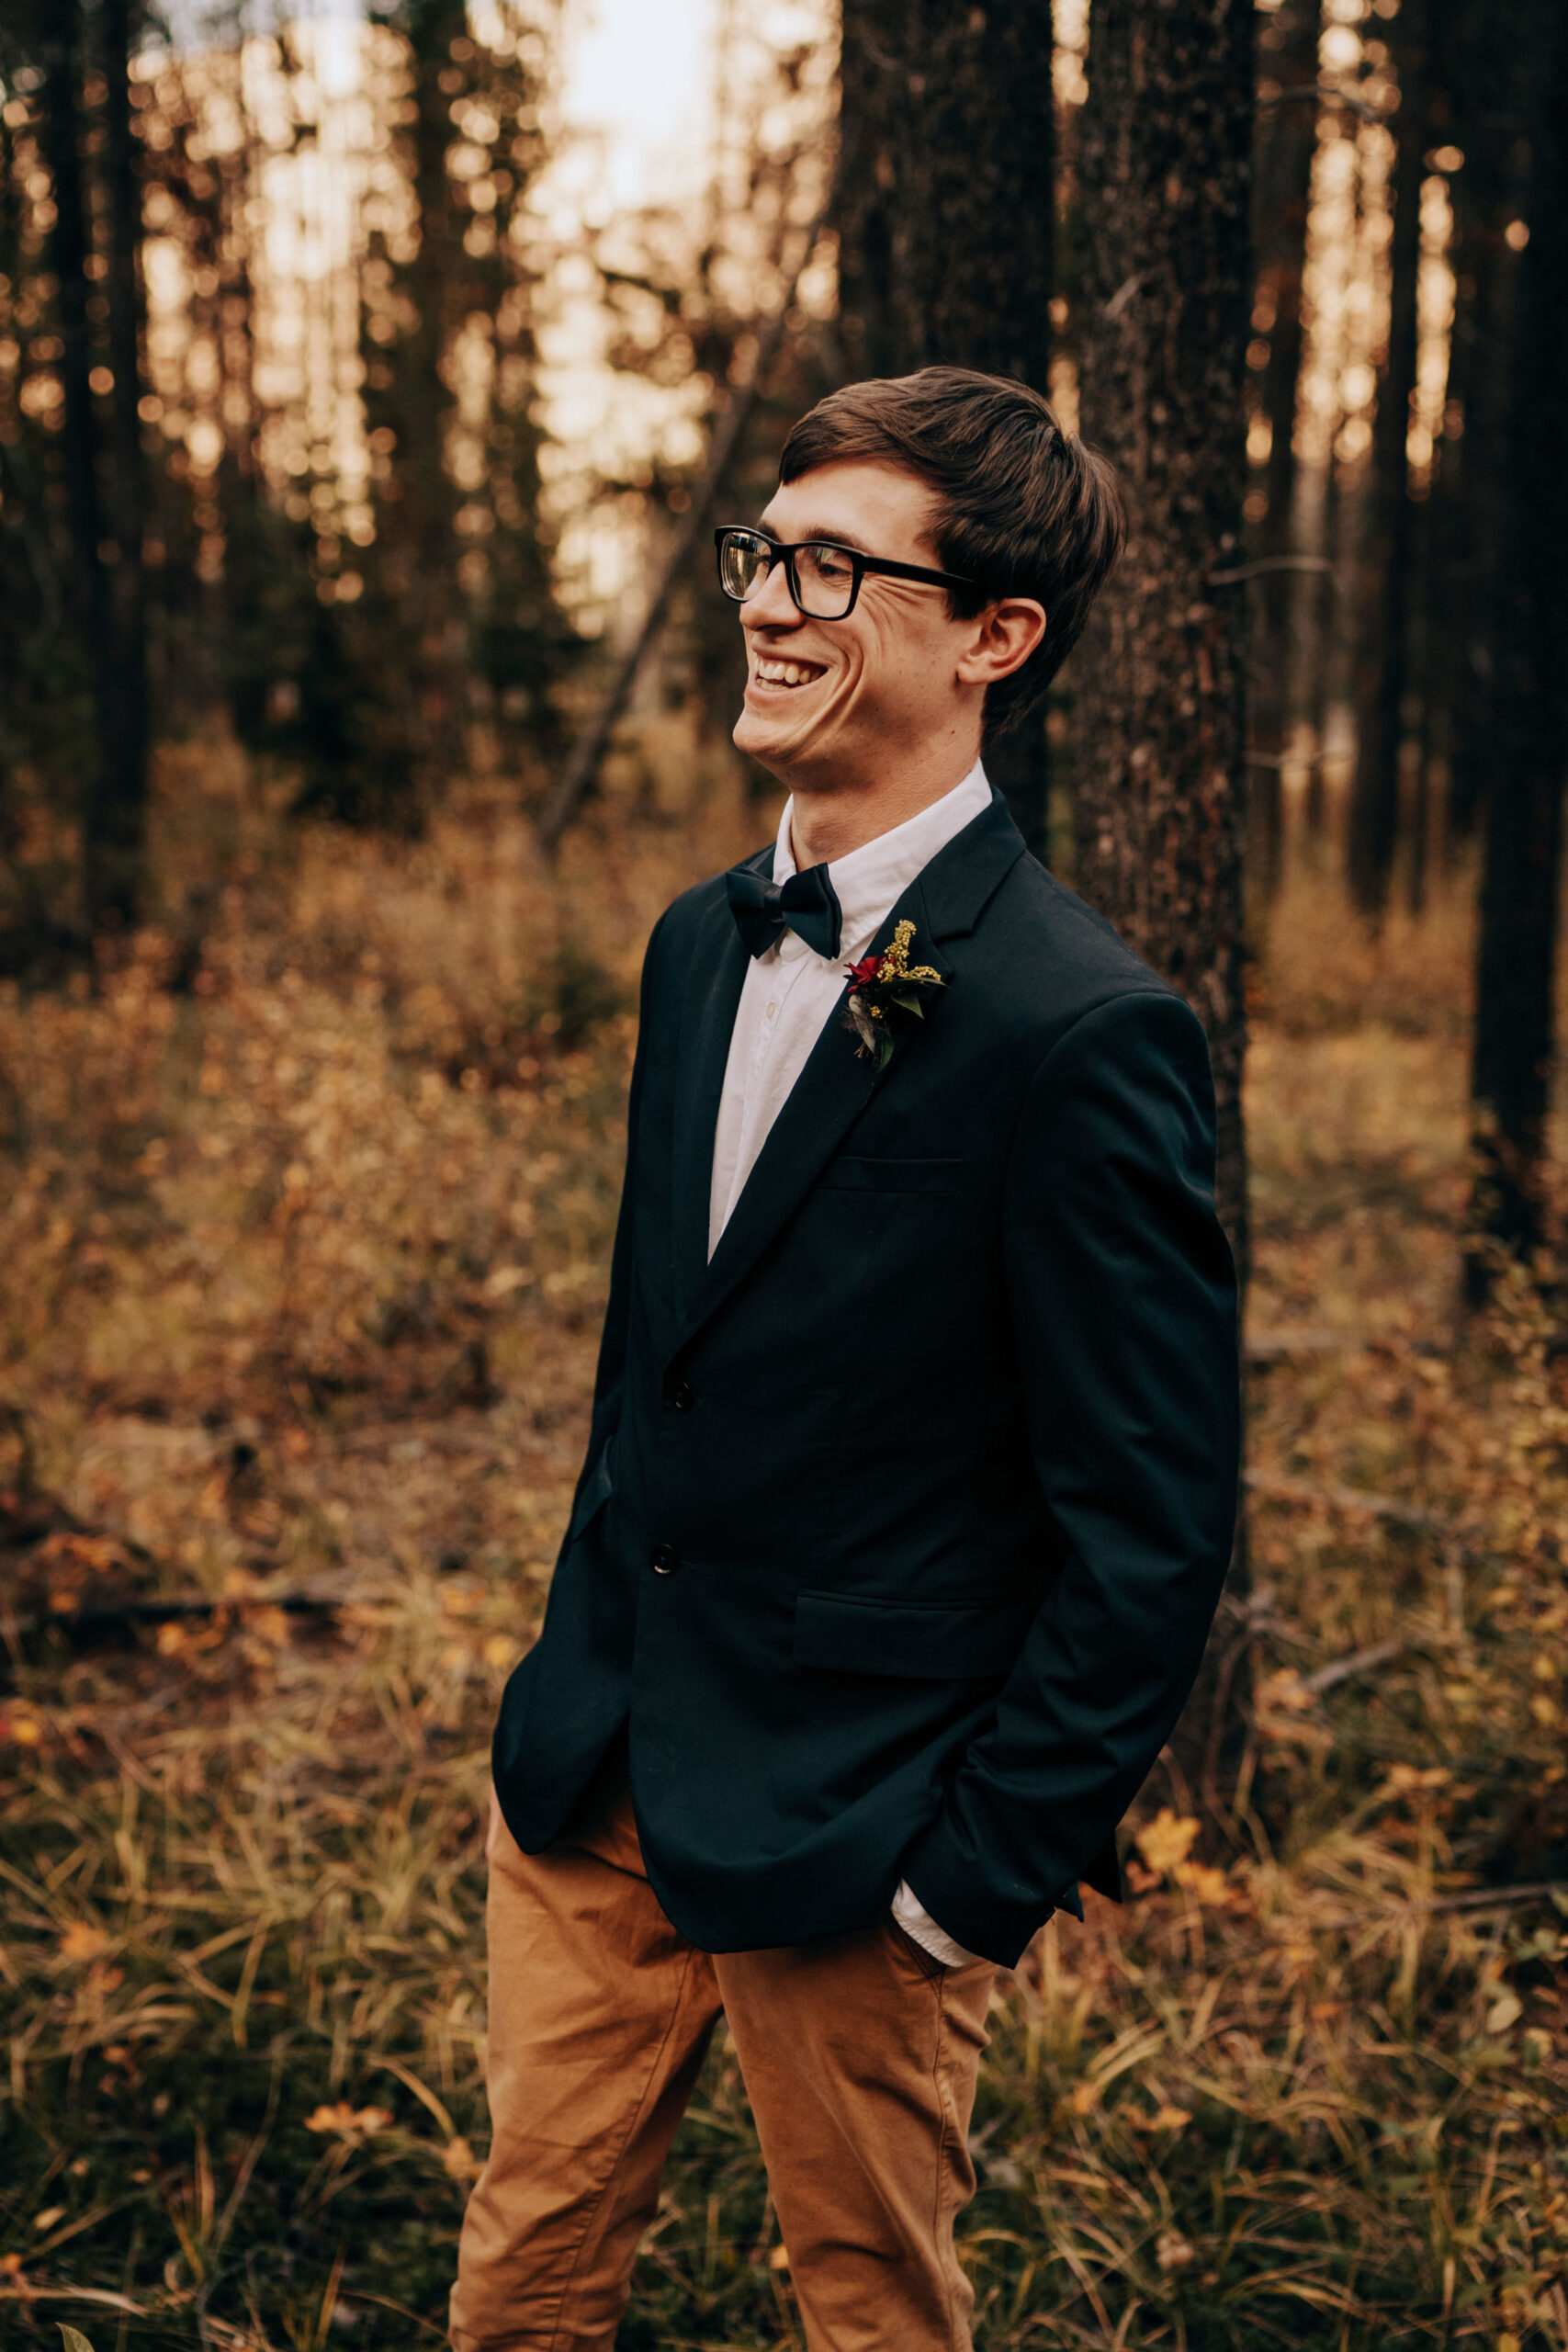 Groom in dark suit jacket and tan pants with bowtie